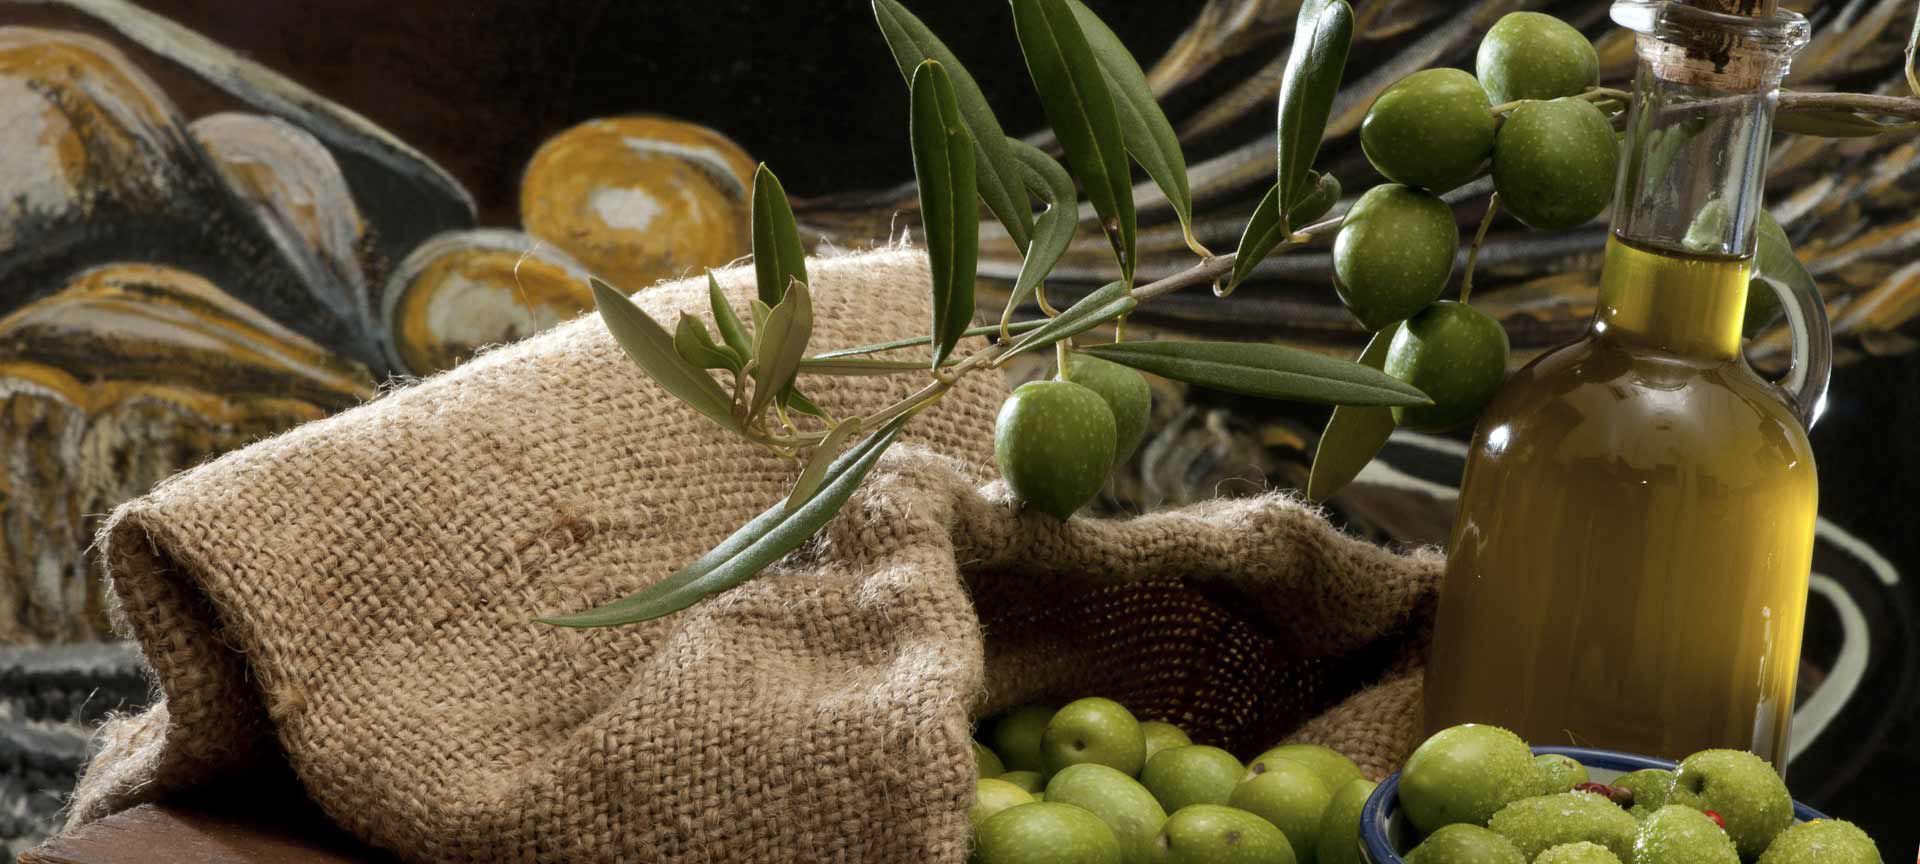 Tuscan olive oil